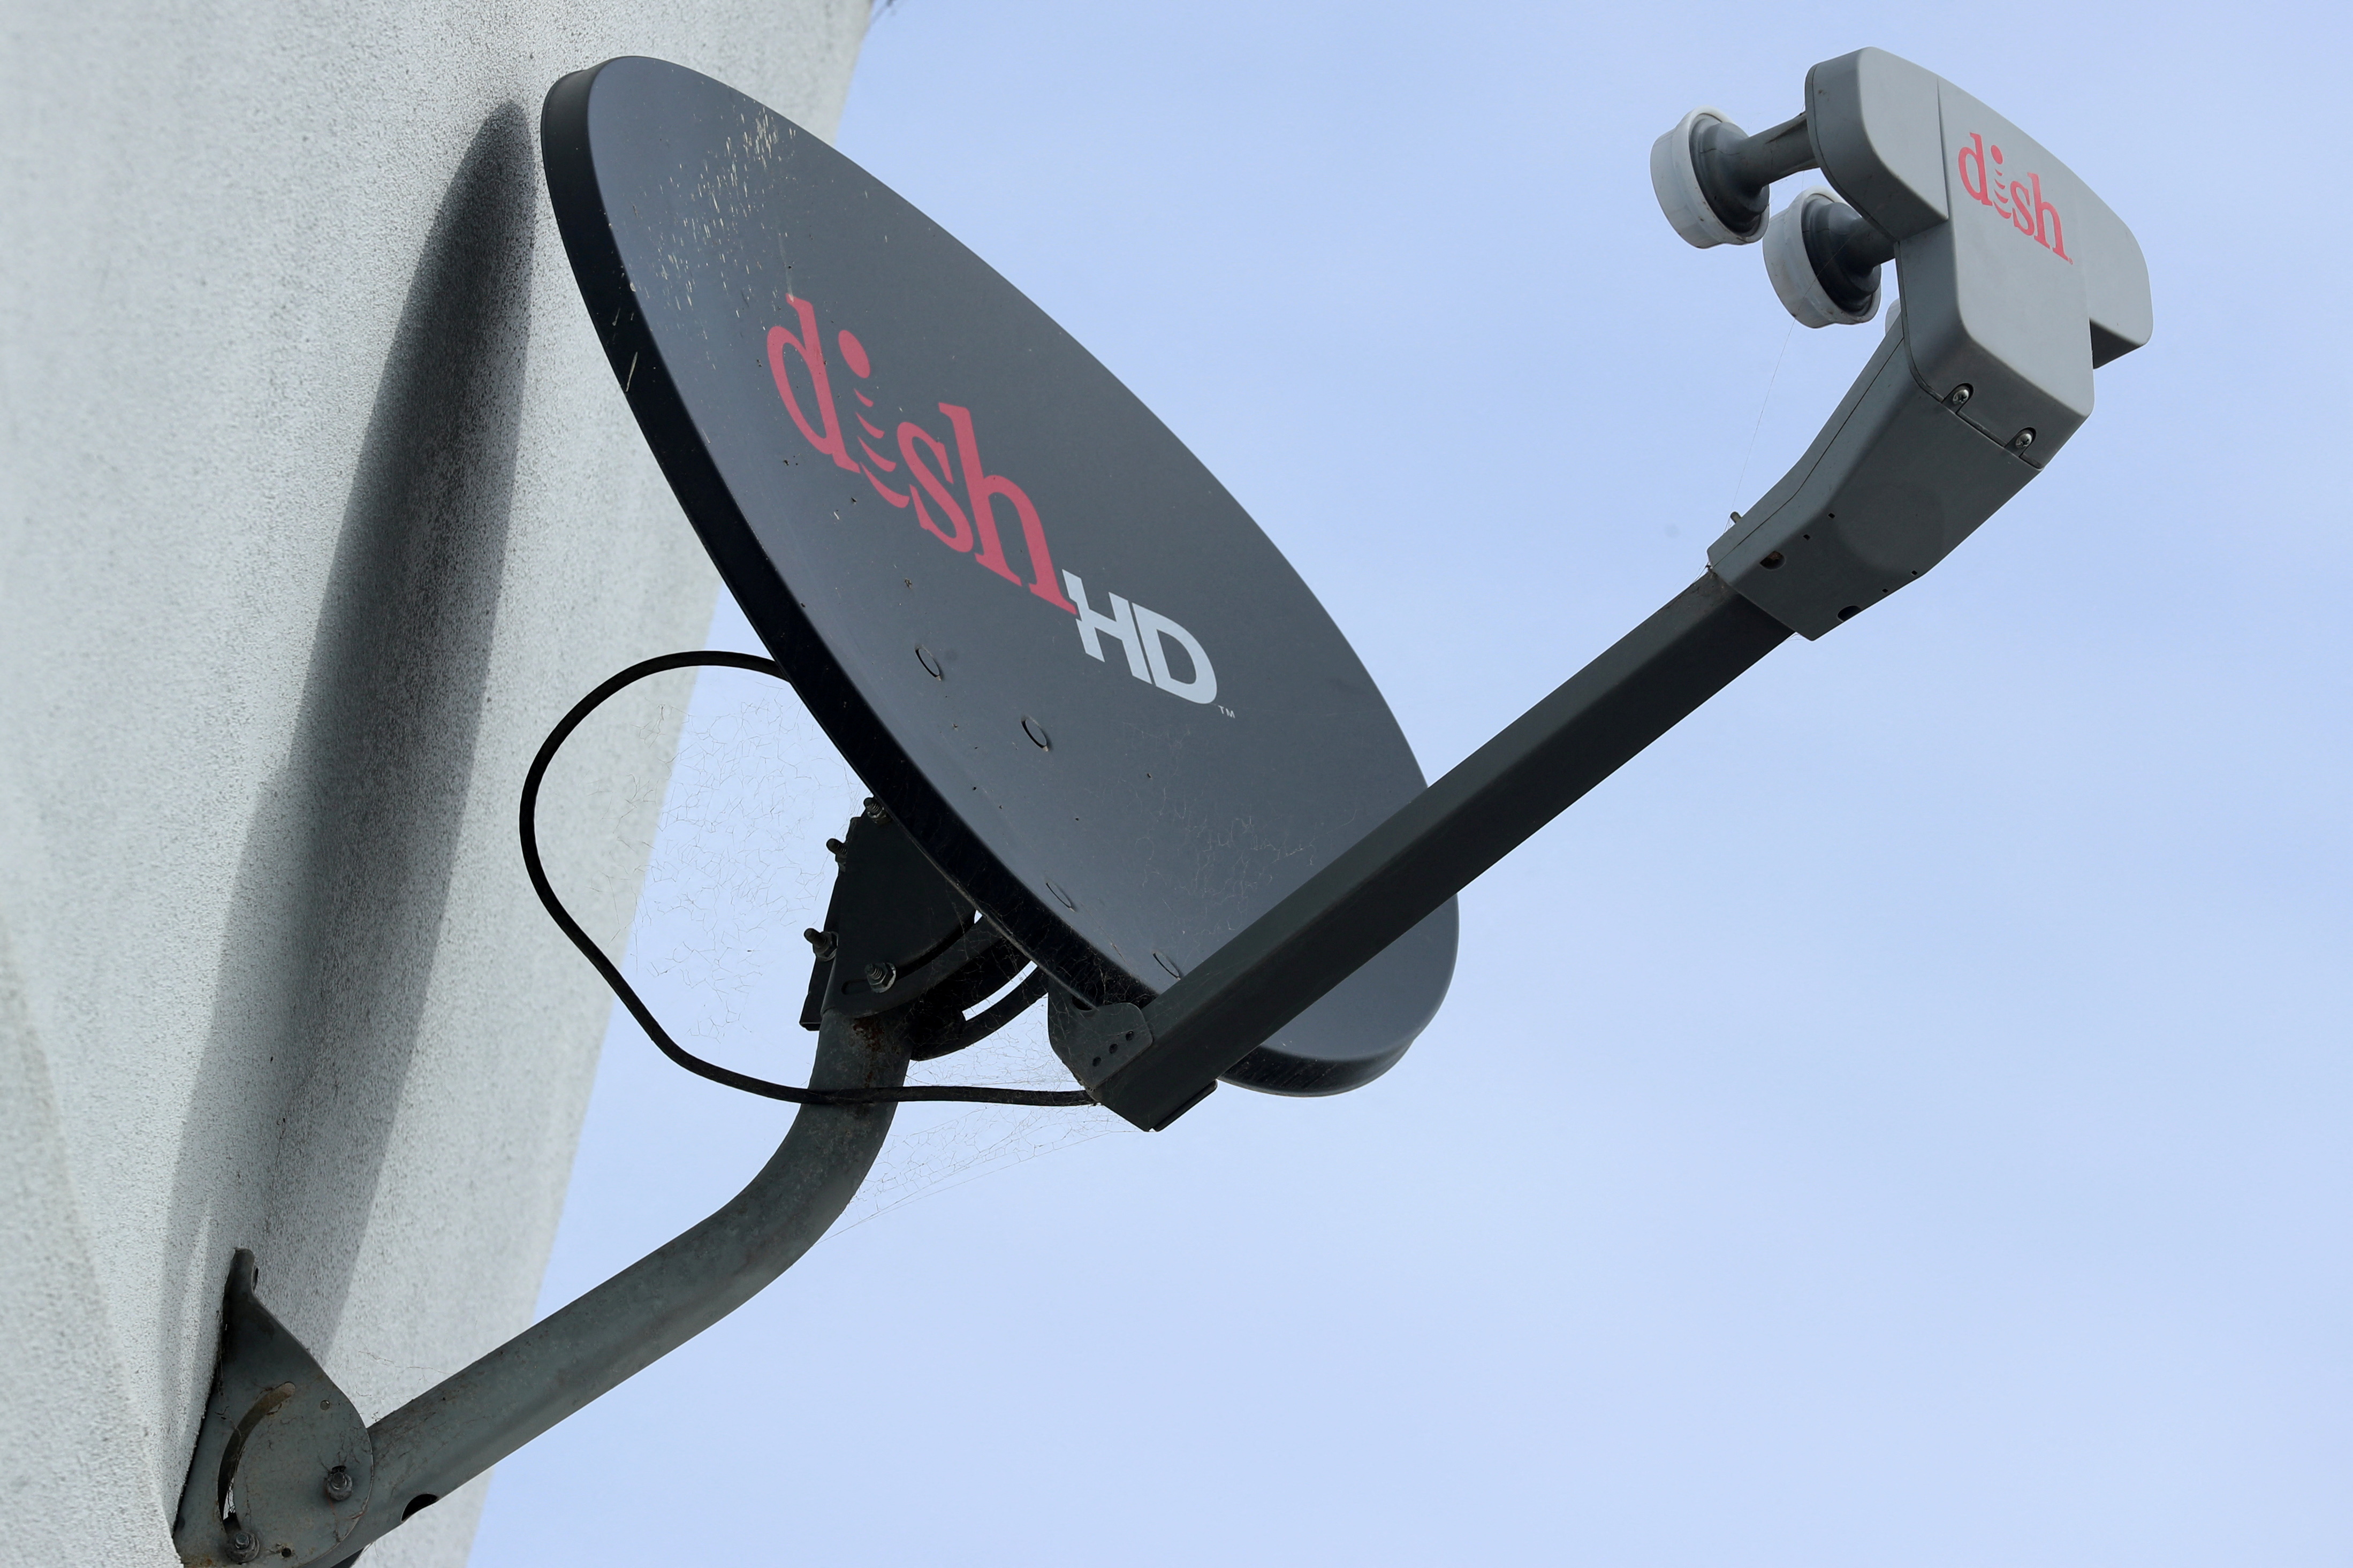 A Dish Network satellite dish is shown on a residential home in Encinitas, California